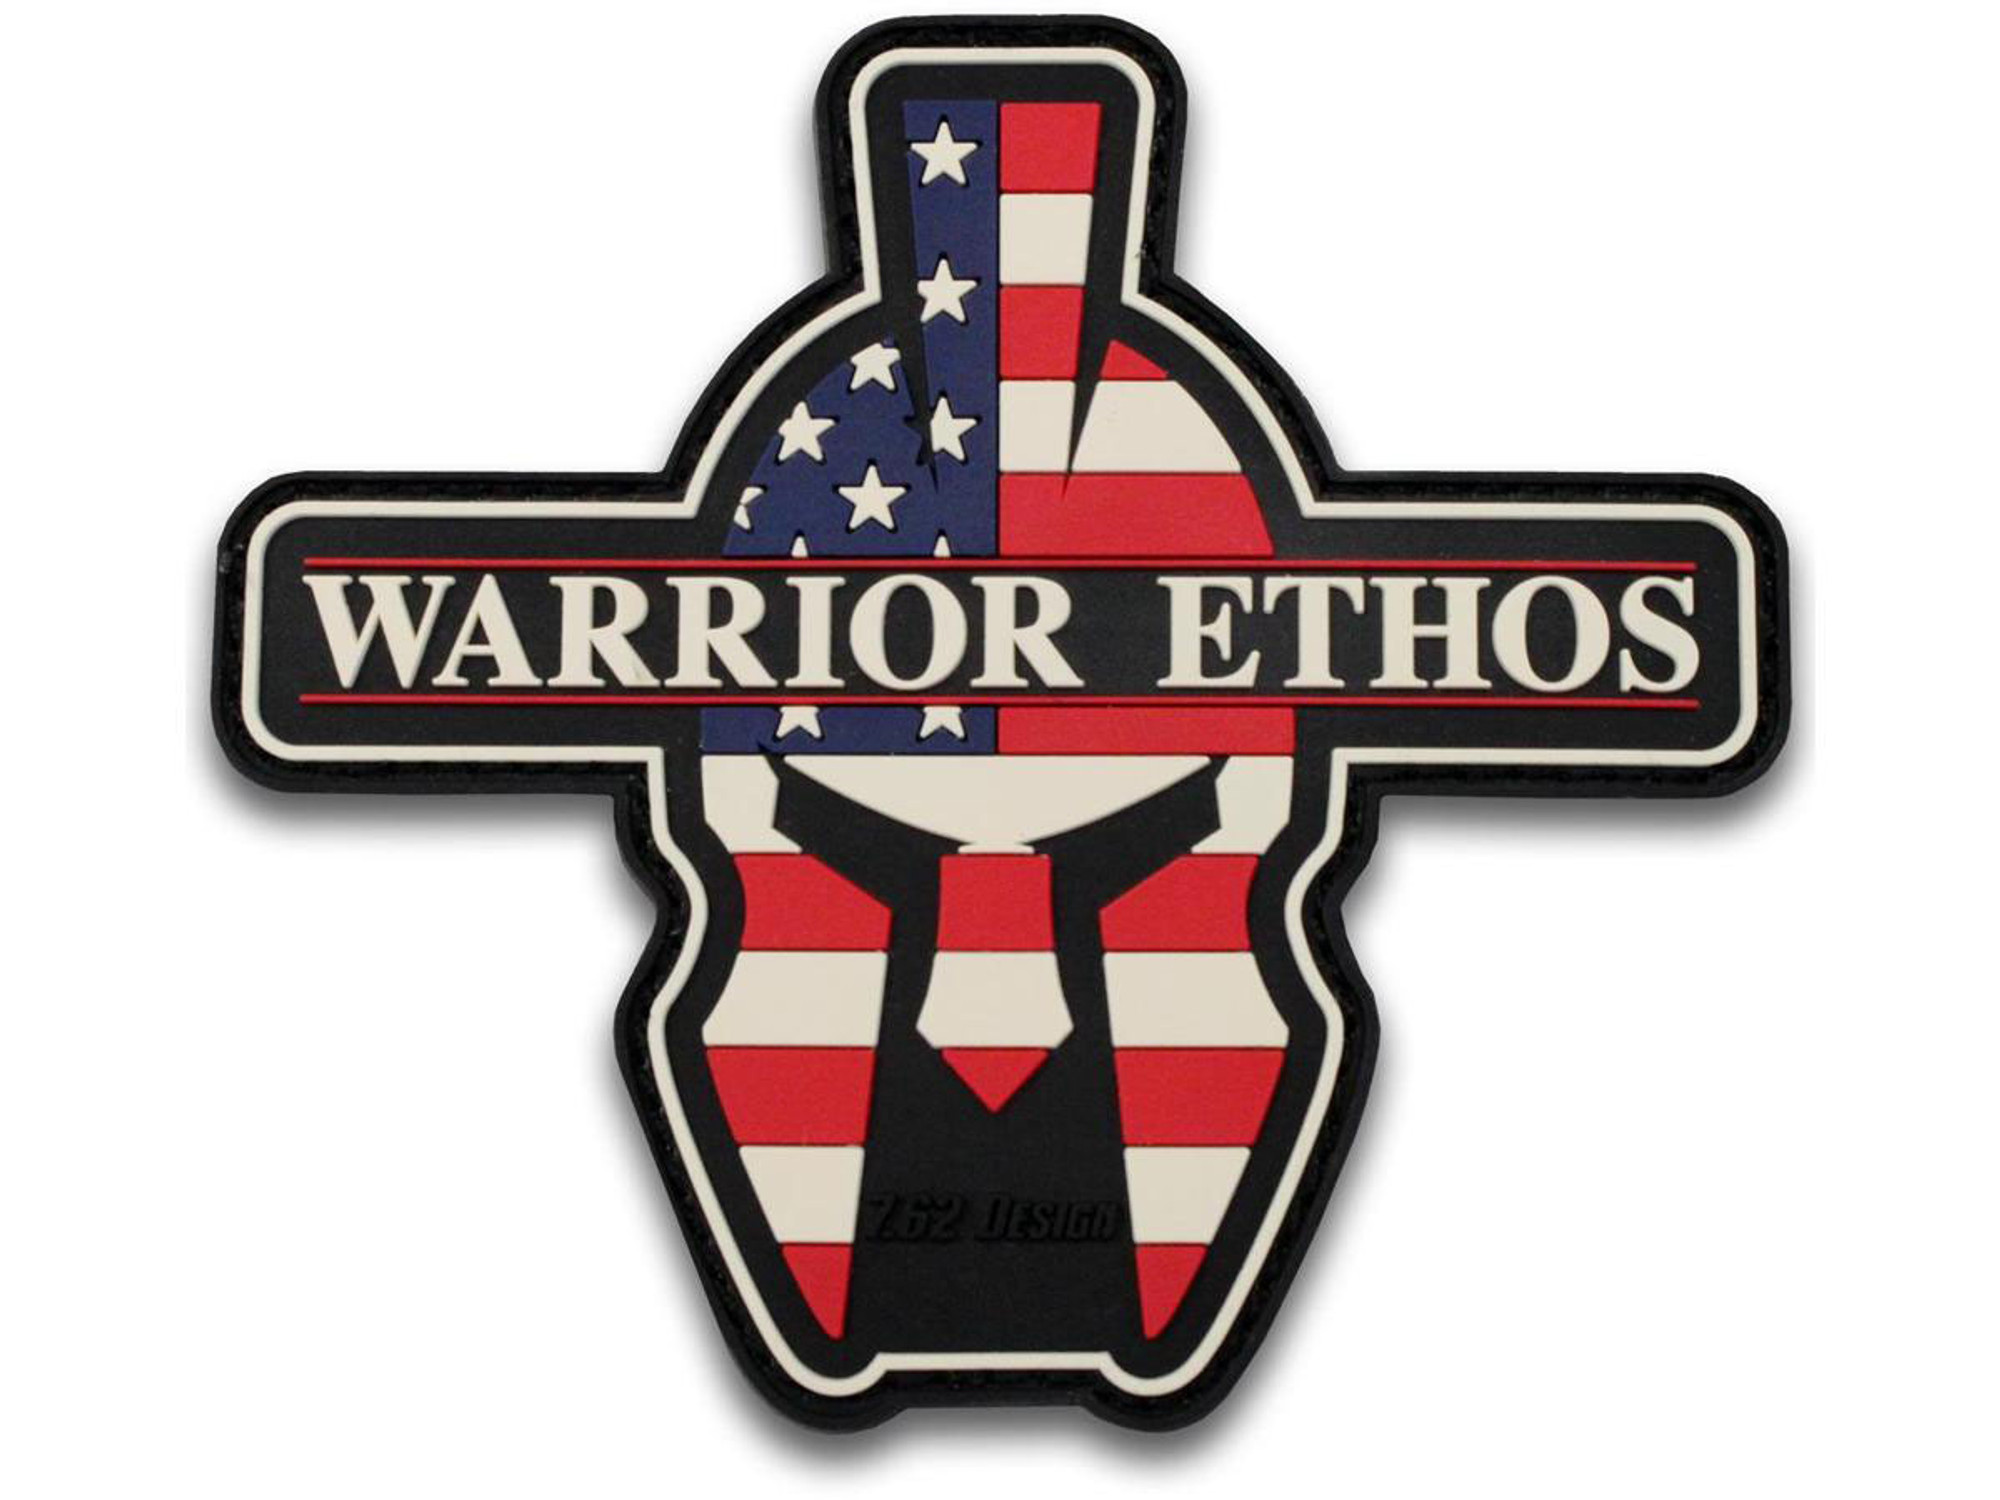 7.62 Designs PVC "Warrior Ethos" Hook and Loop Morale Patch (Color: Red White and Blue)